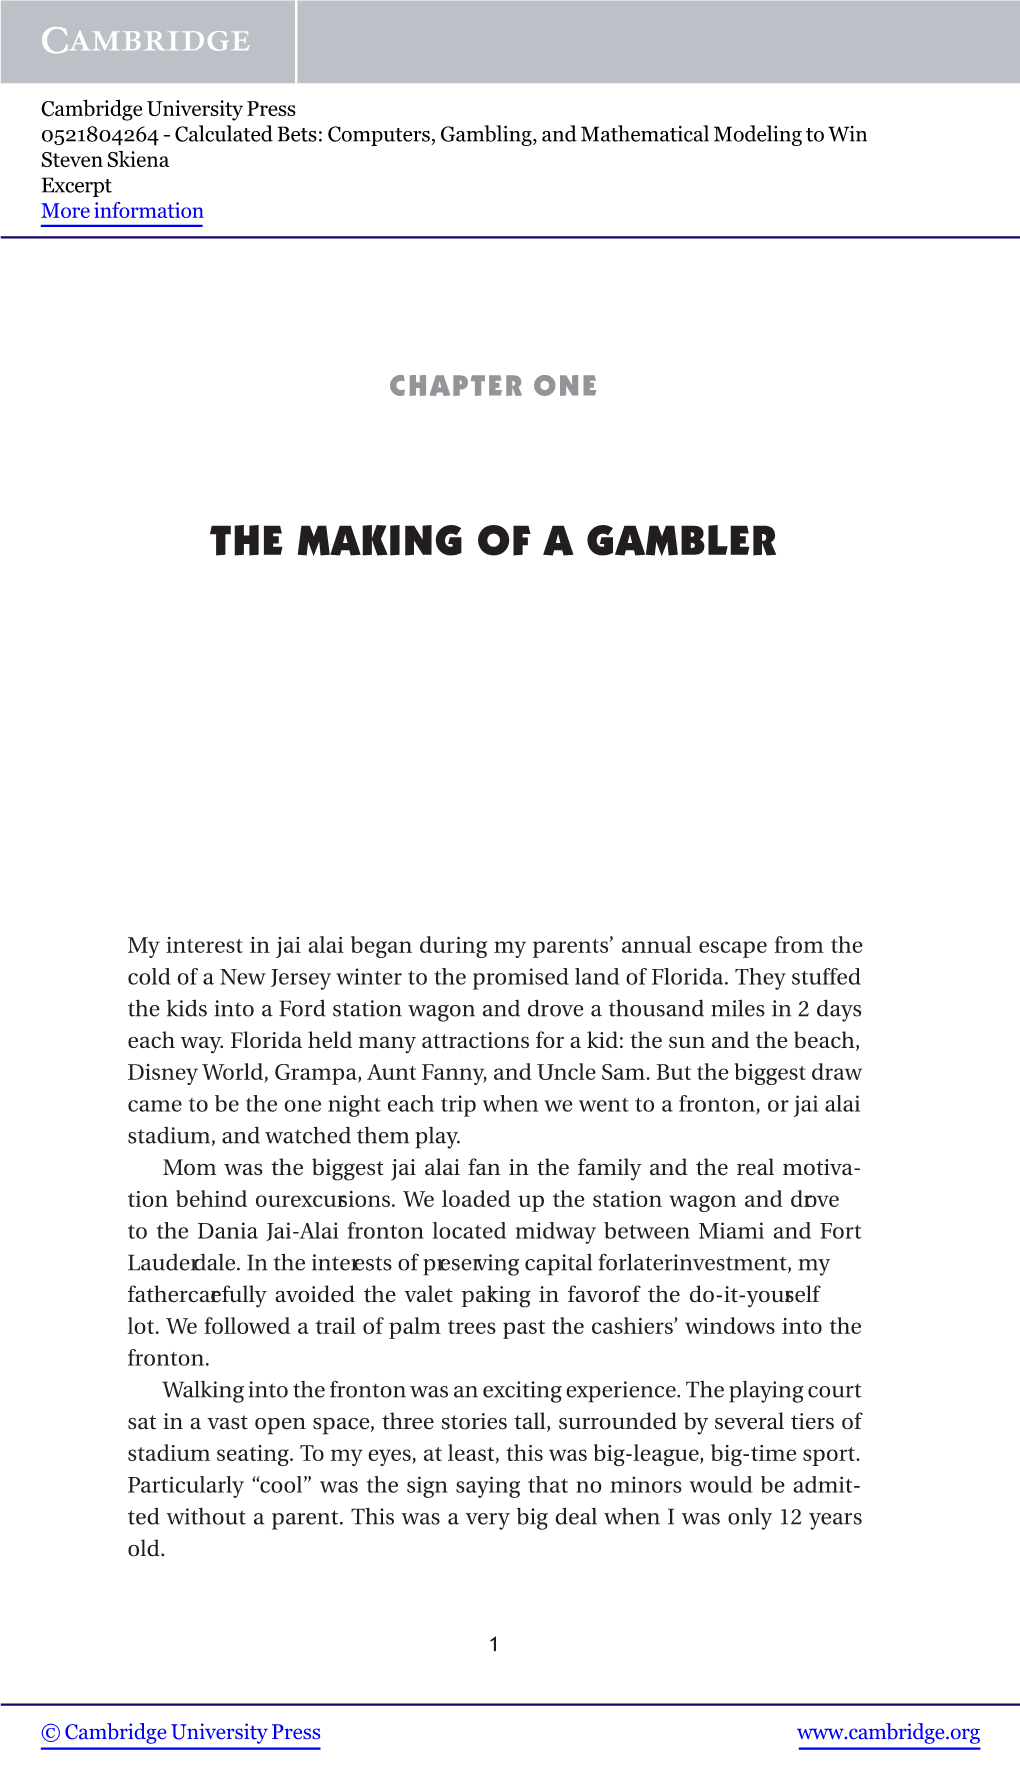 The Making of a Gambler